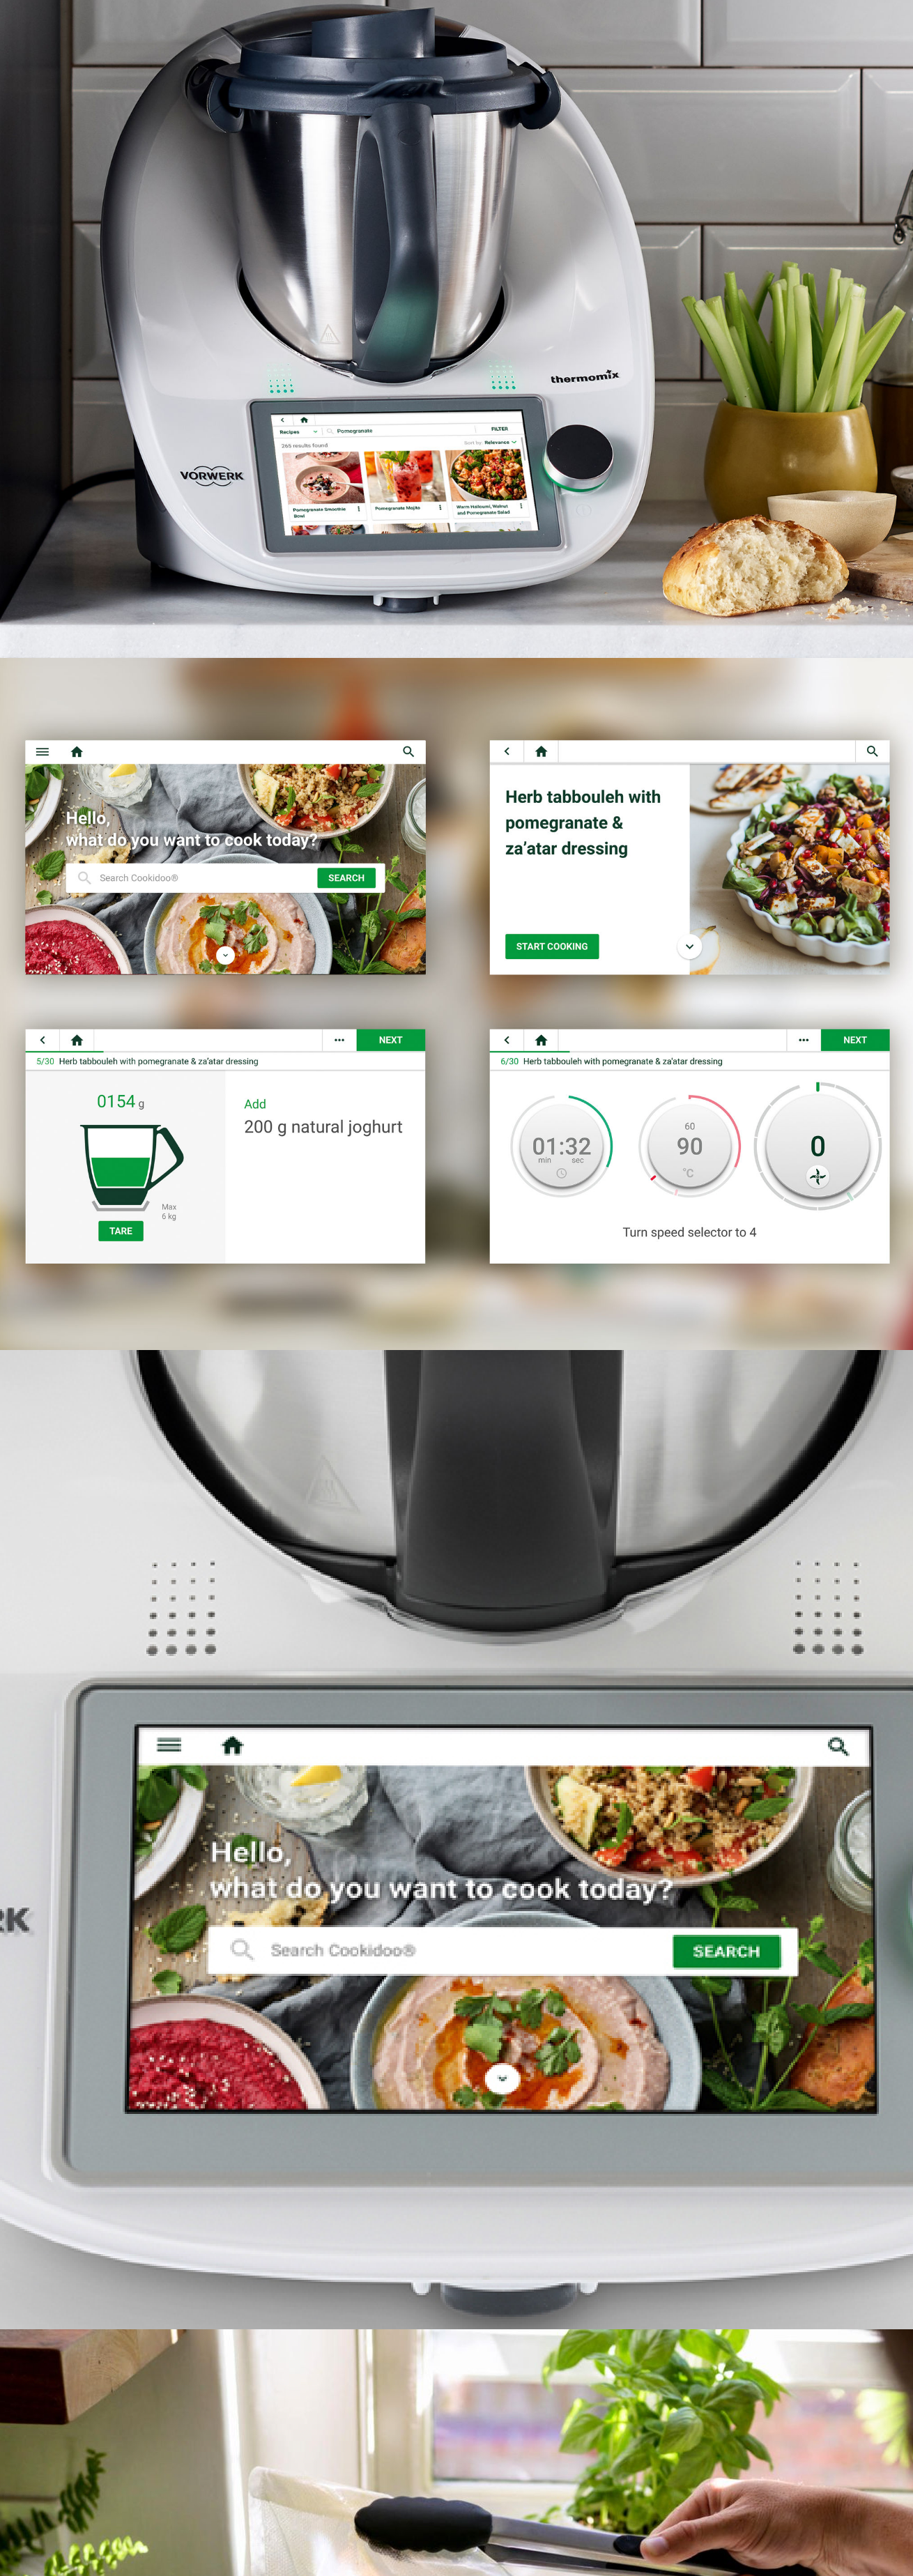 UID, UX Design for Thermomix